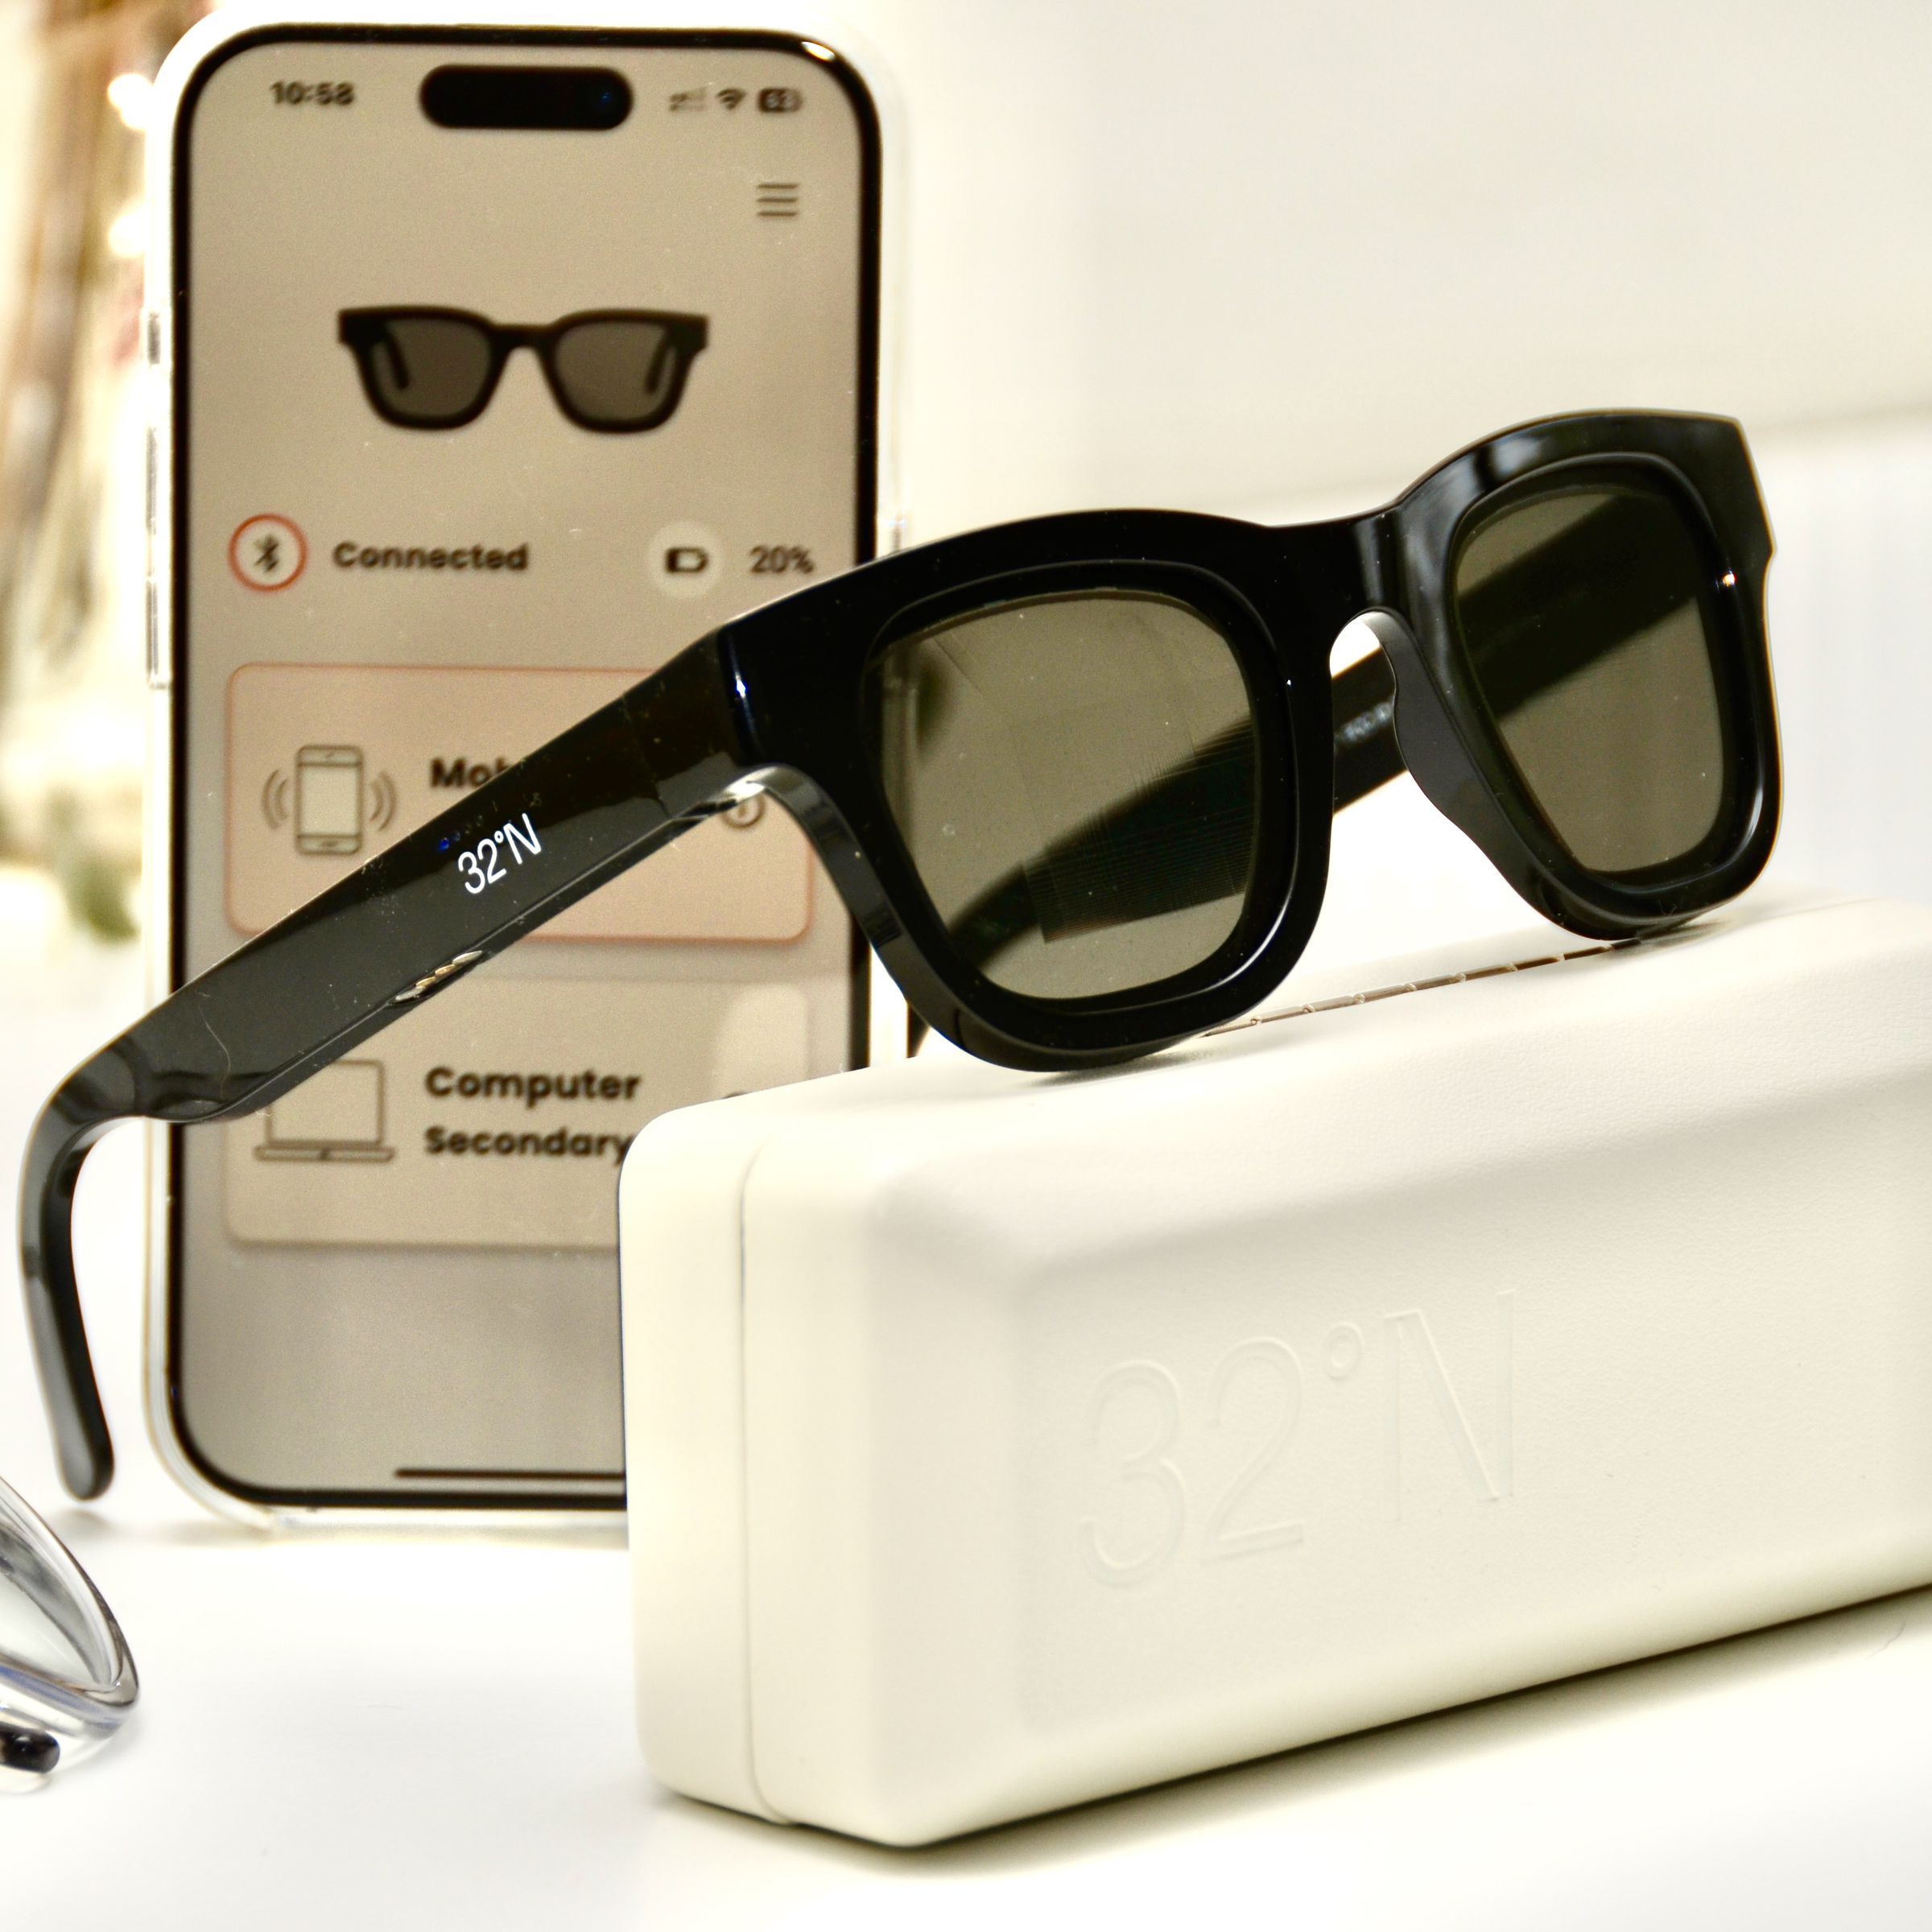 A pair of Muir sunglasses sit perched on top of their case in front of an iPhone open to the 32°N app showing 20 percent battery remaining on the sunglasses.